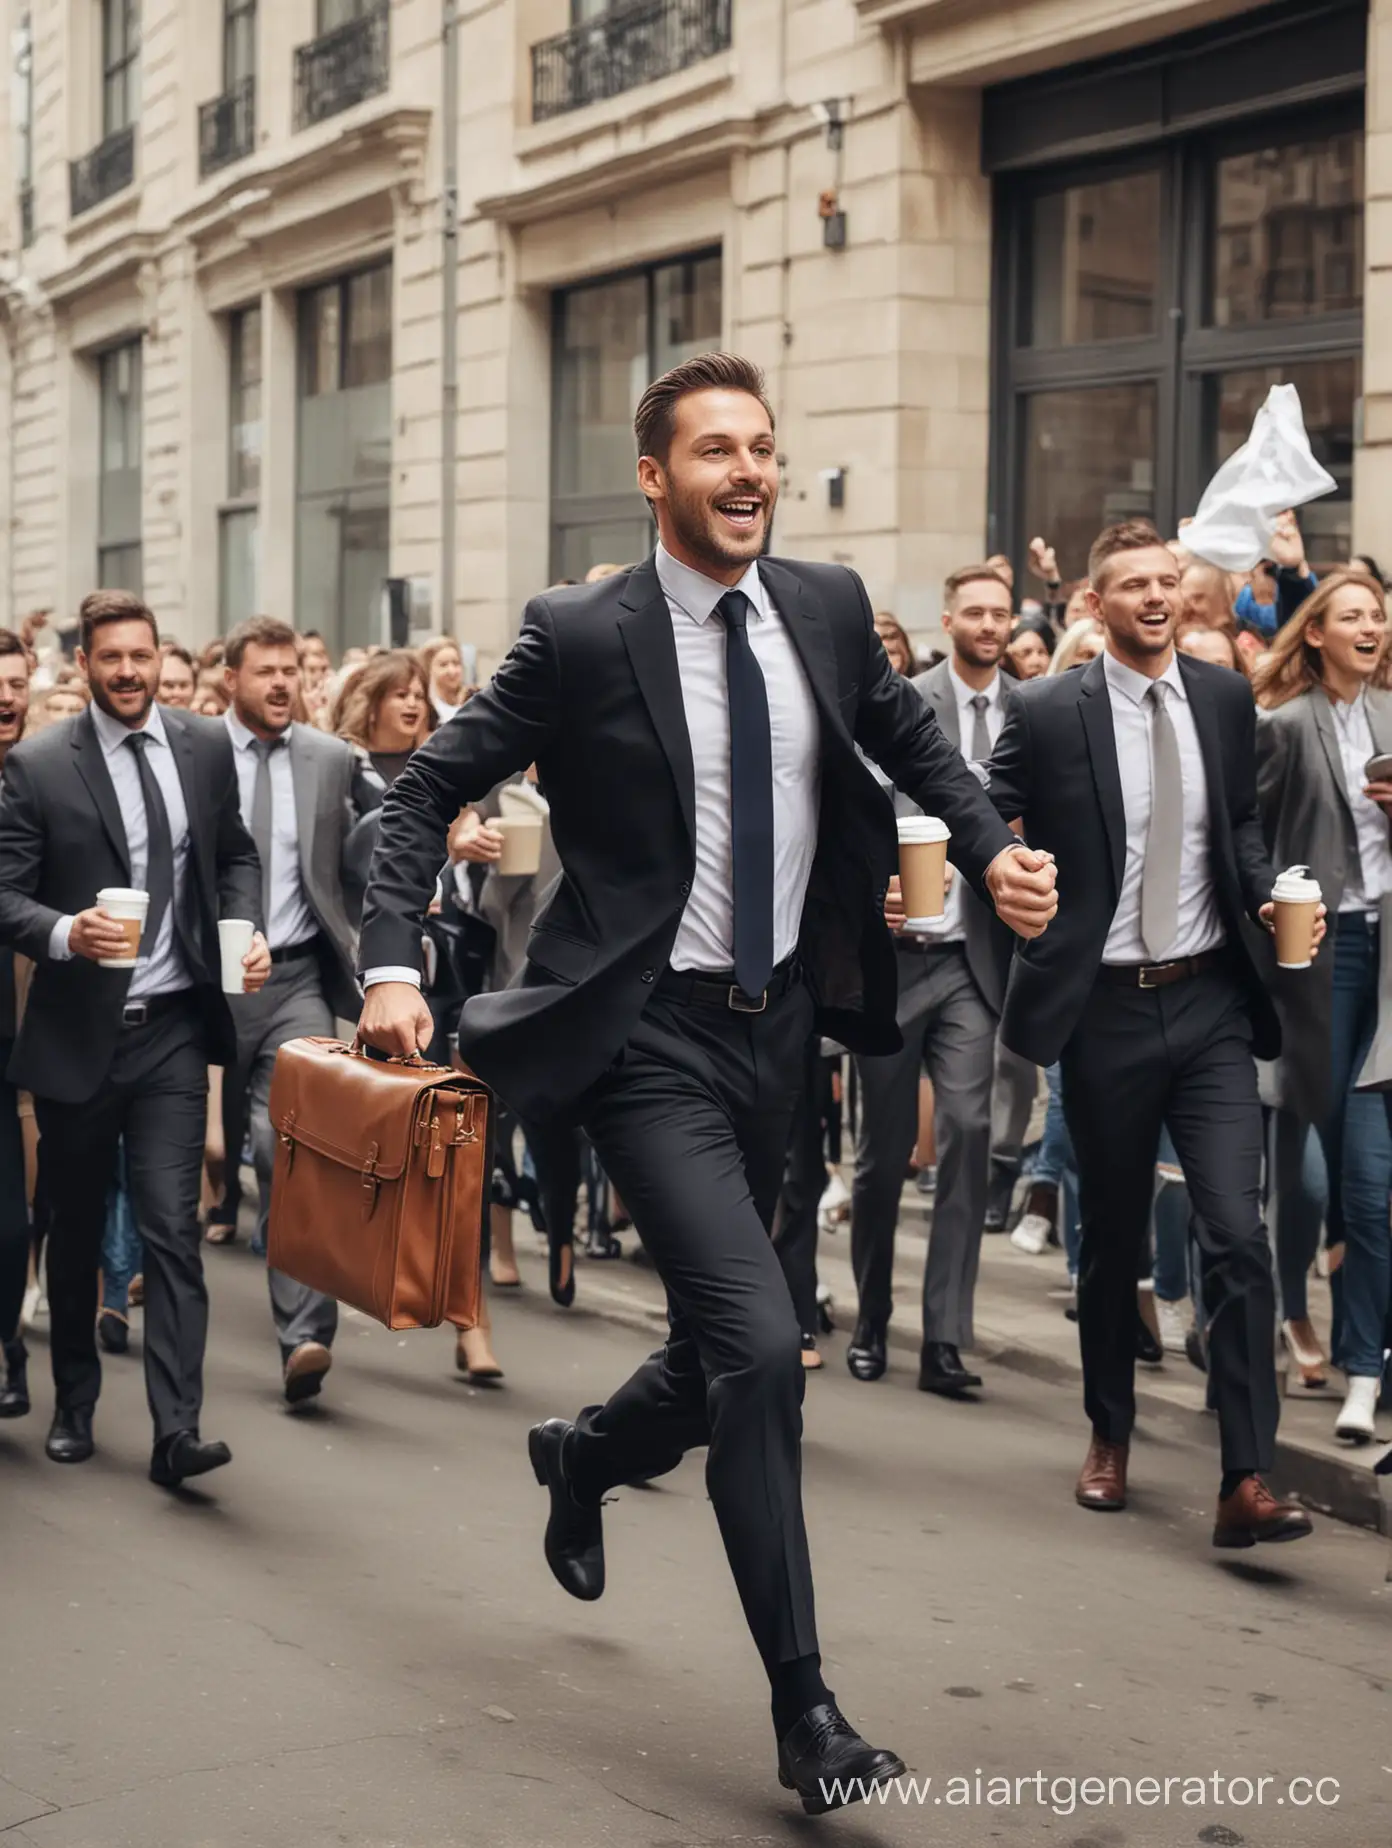 Busy-Businessman-Rushing-Through-Crowded-City-Street-with-Coffee-Cup-and-Briefcase